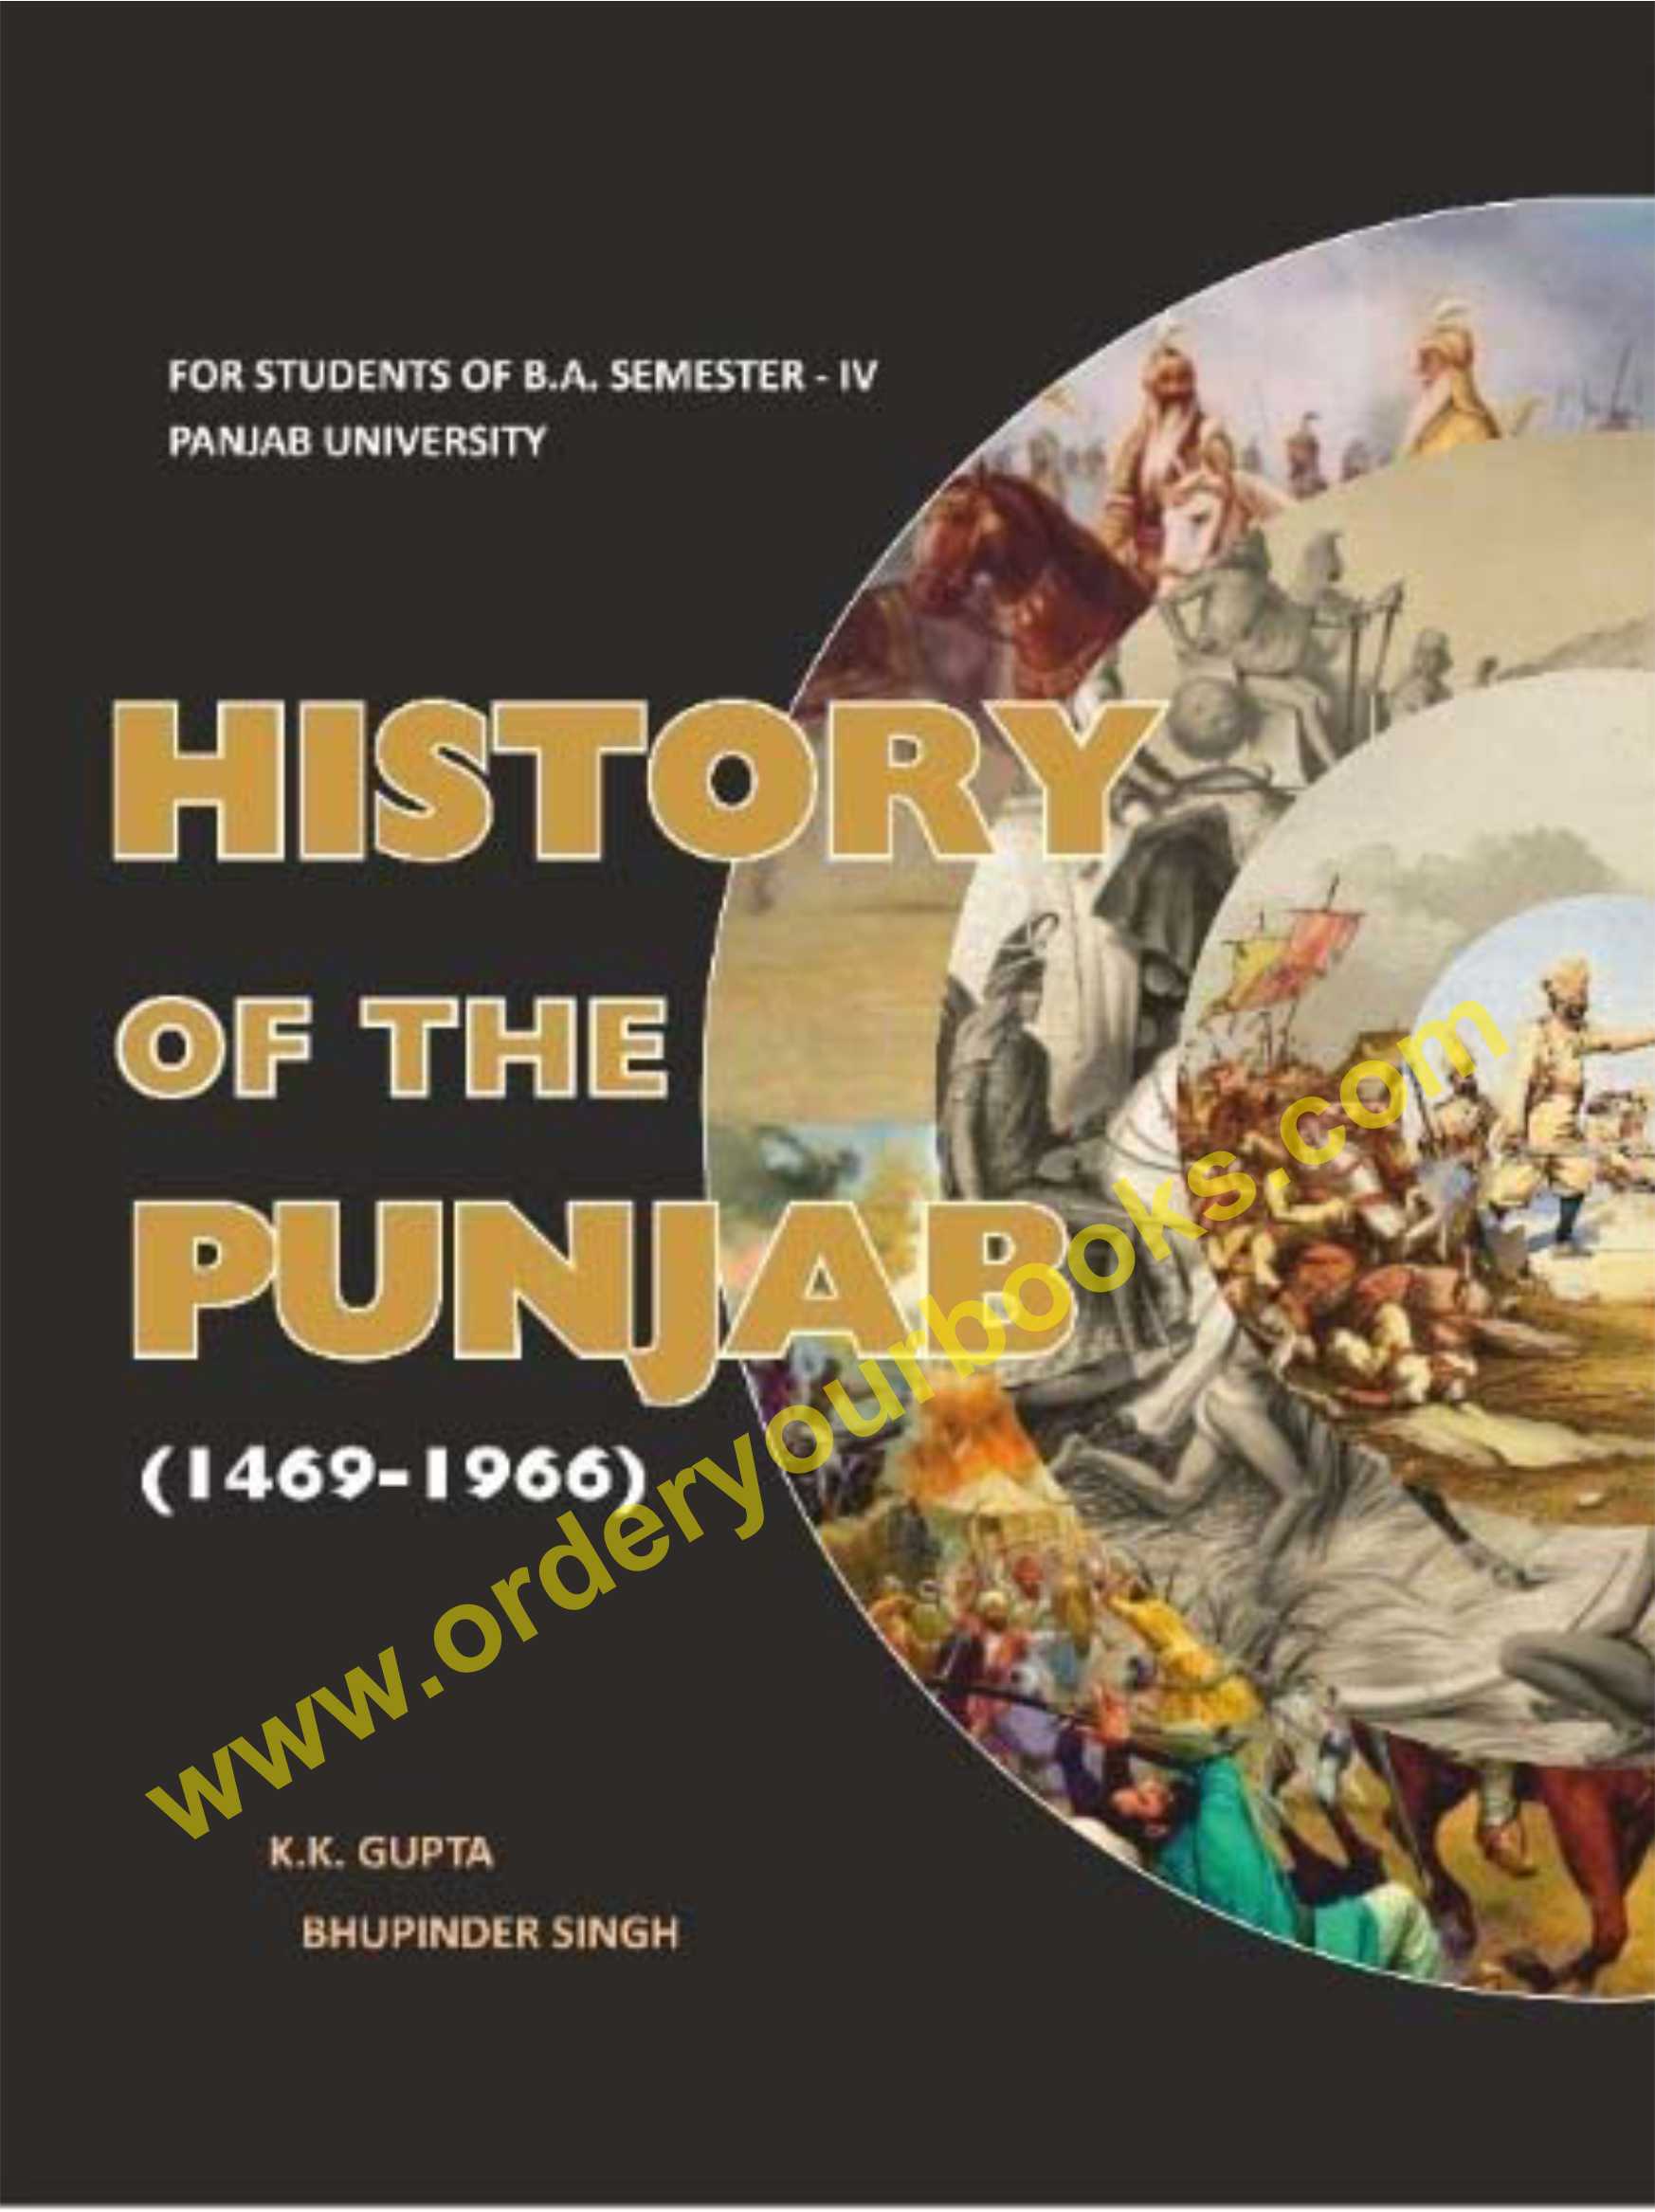 History of the Punjab 1469-1966 for Semester-IV B.A. (P.U.) by Dr. K.K. Gupta and Bhupinder Singh (Mohindra Publishng house) Edition 2021 for Panjab University